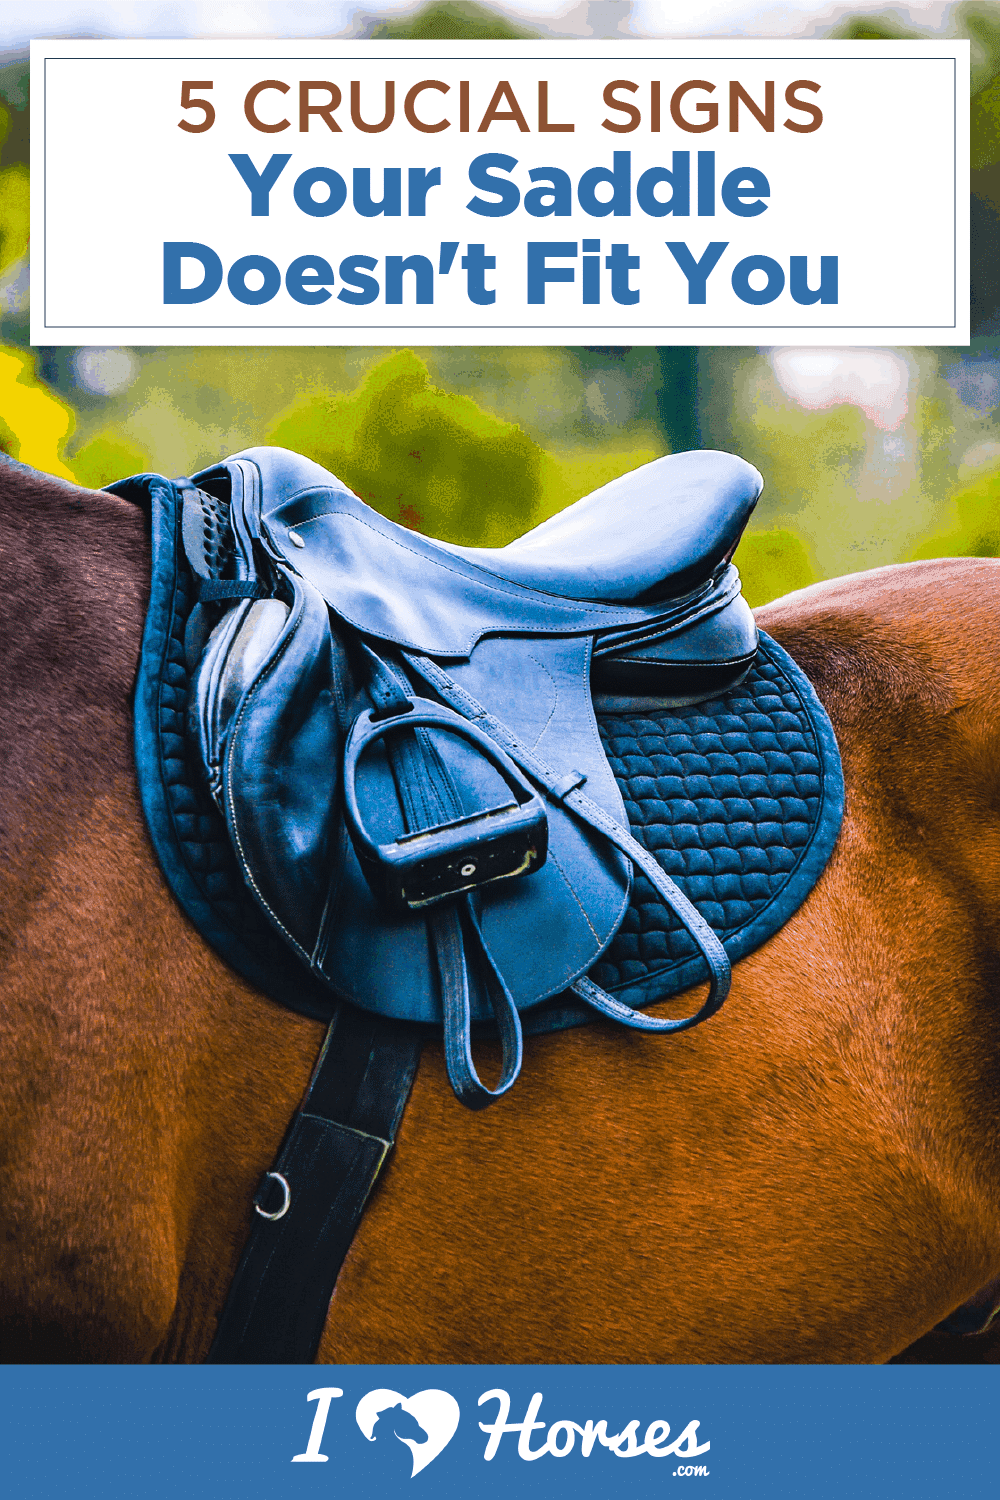 signs your saddle doesn't fit